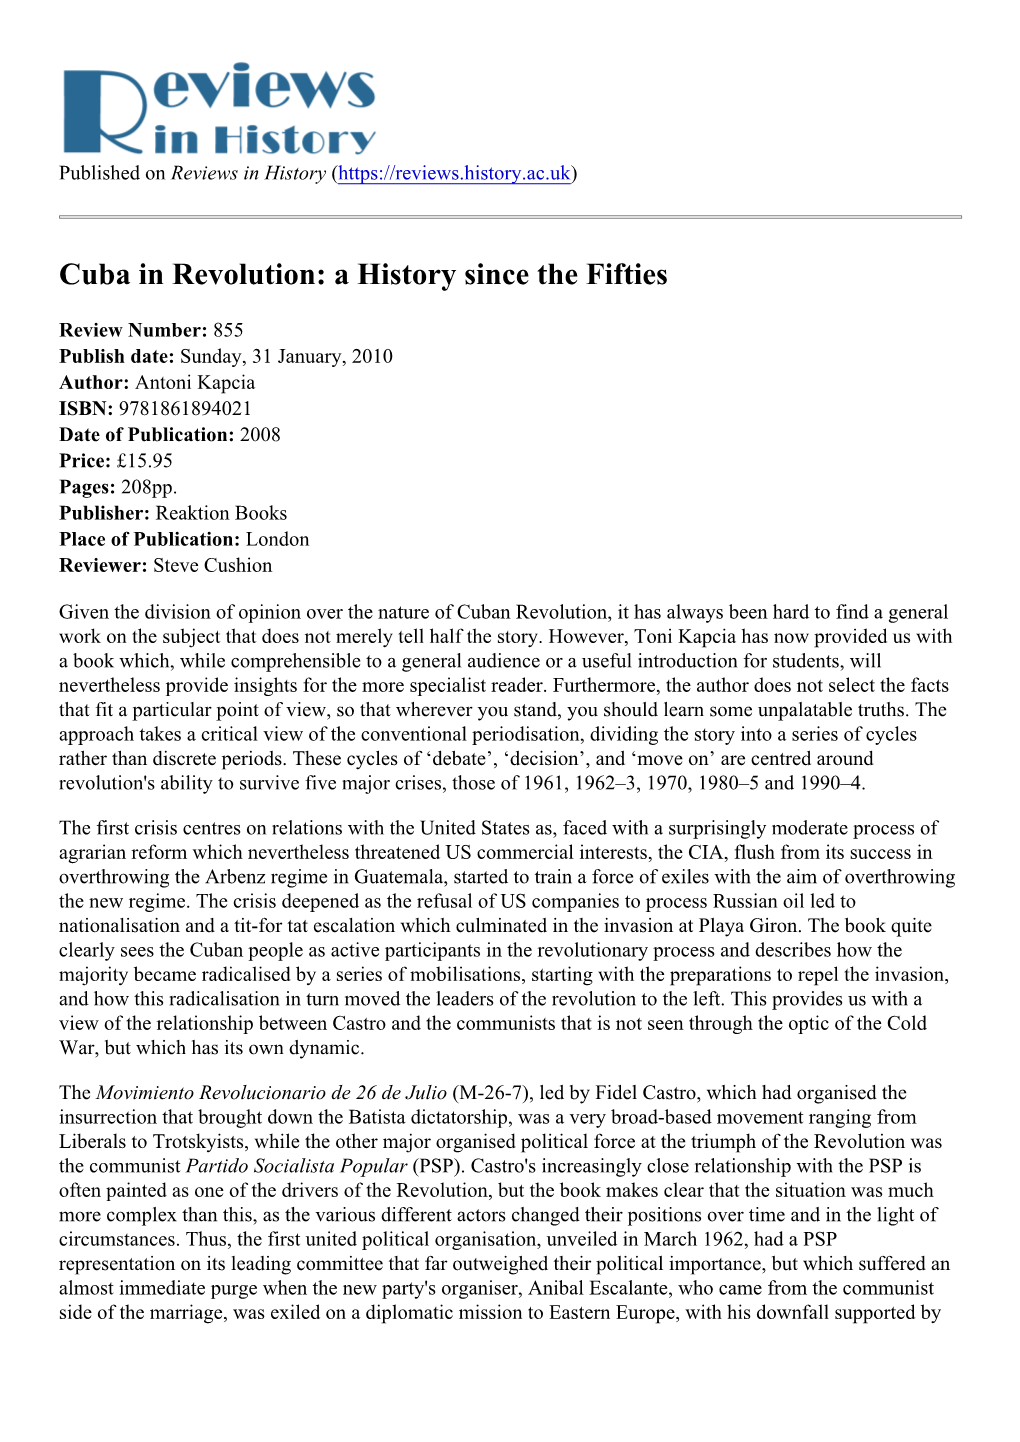 Cuba in Revolution: a History Since the Fifties